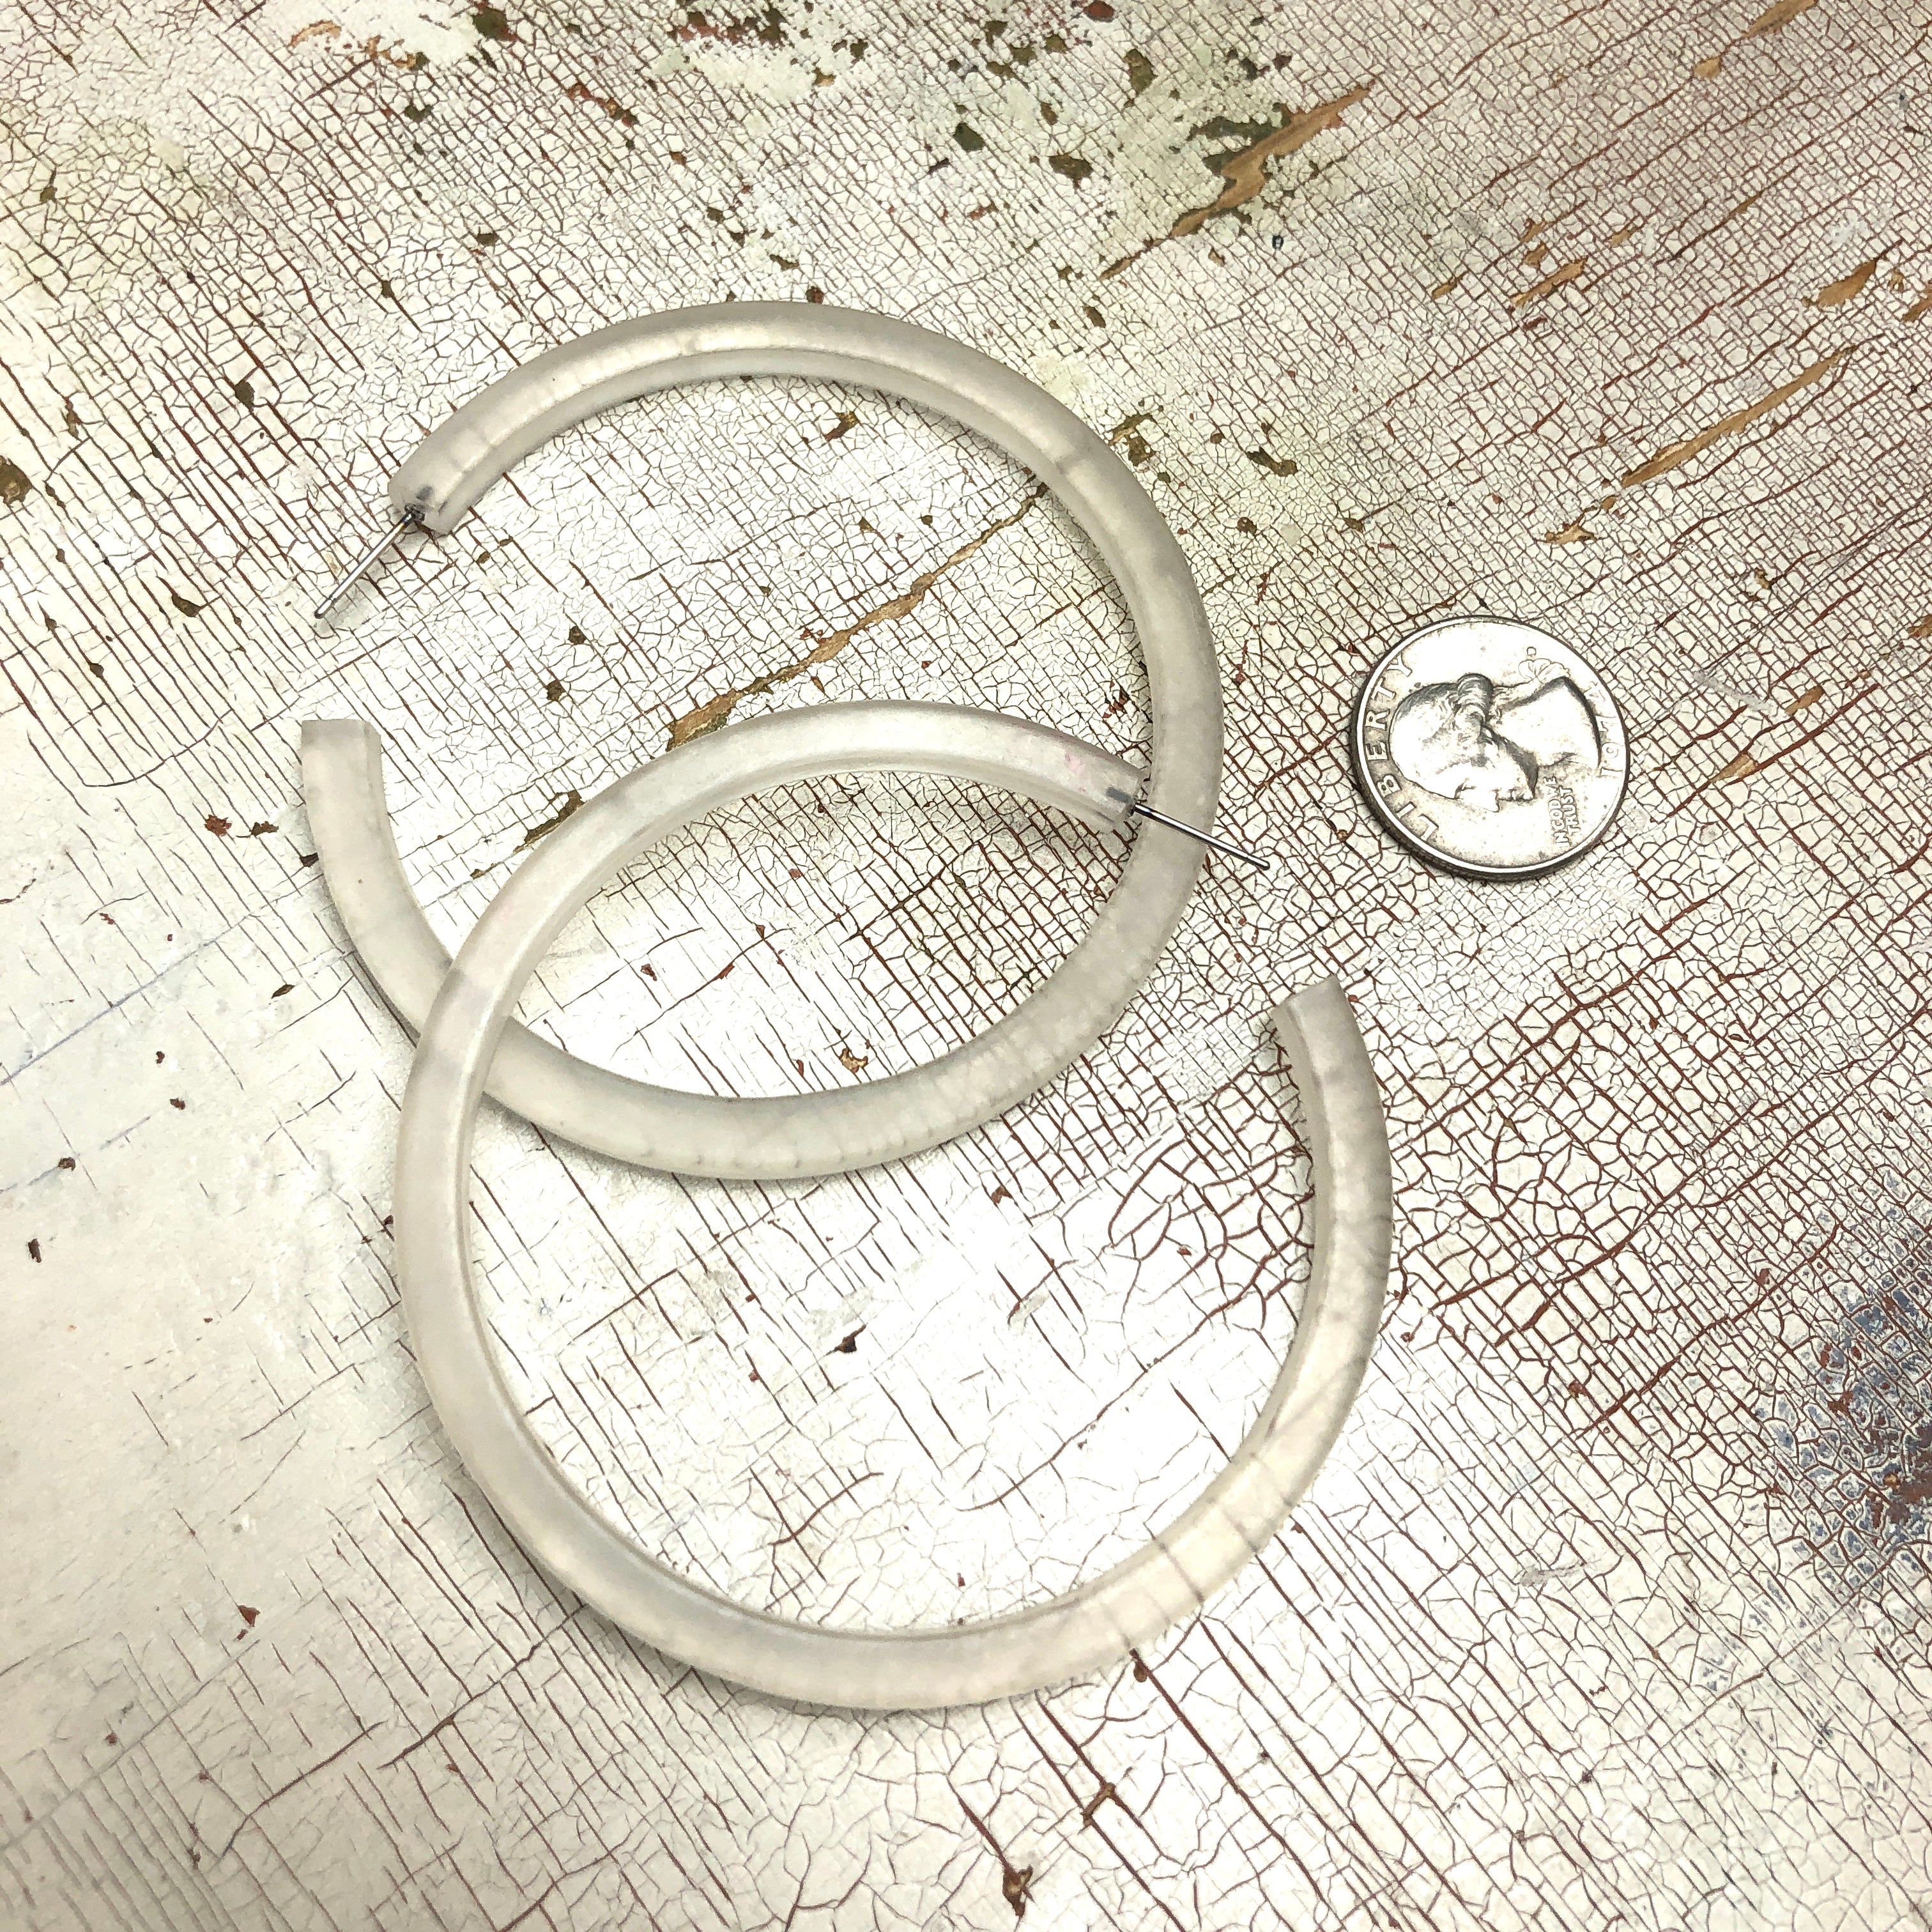 Frosted Clear Bangle Hoop Earrings 3 Inch